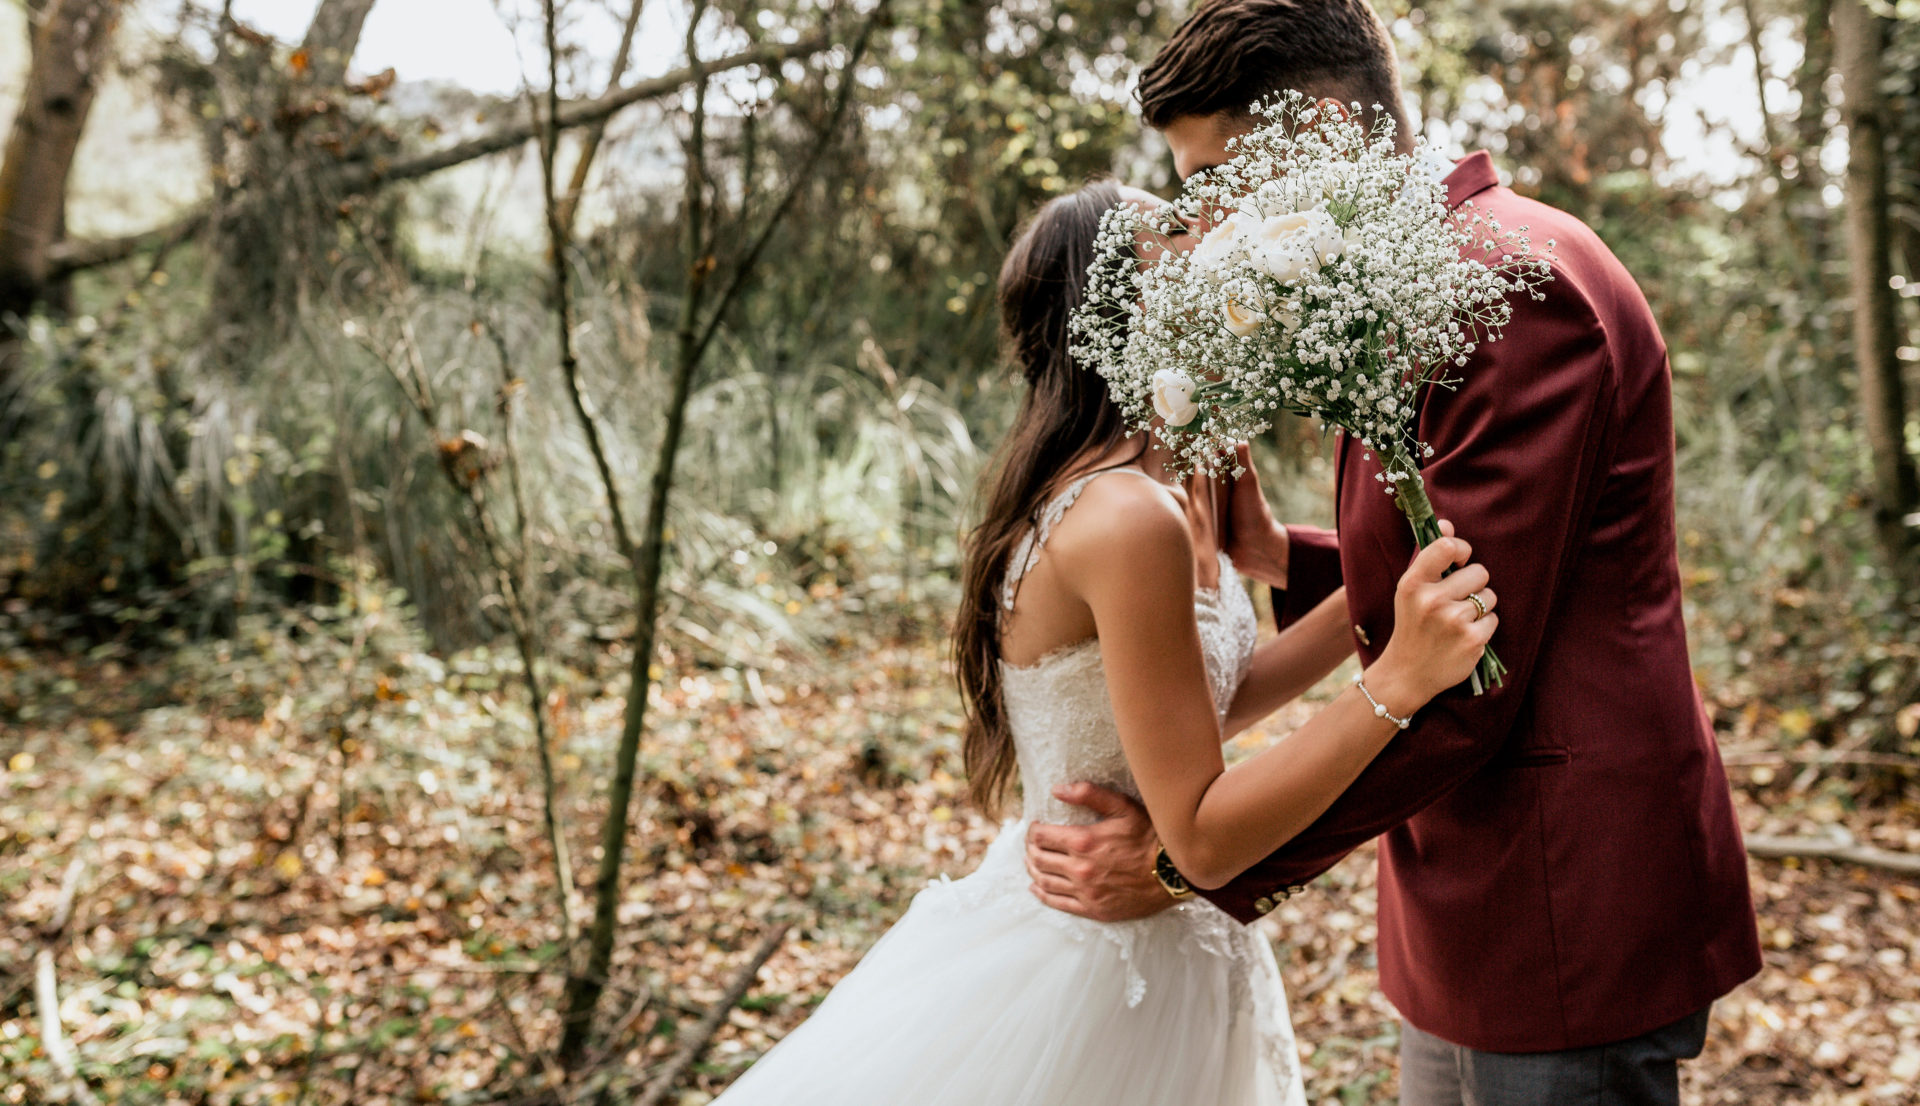 A bride and groom kissing in a forest.